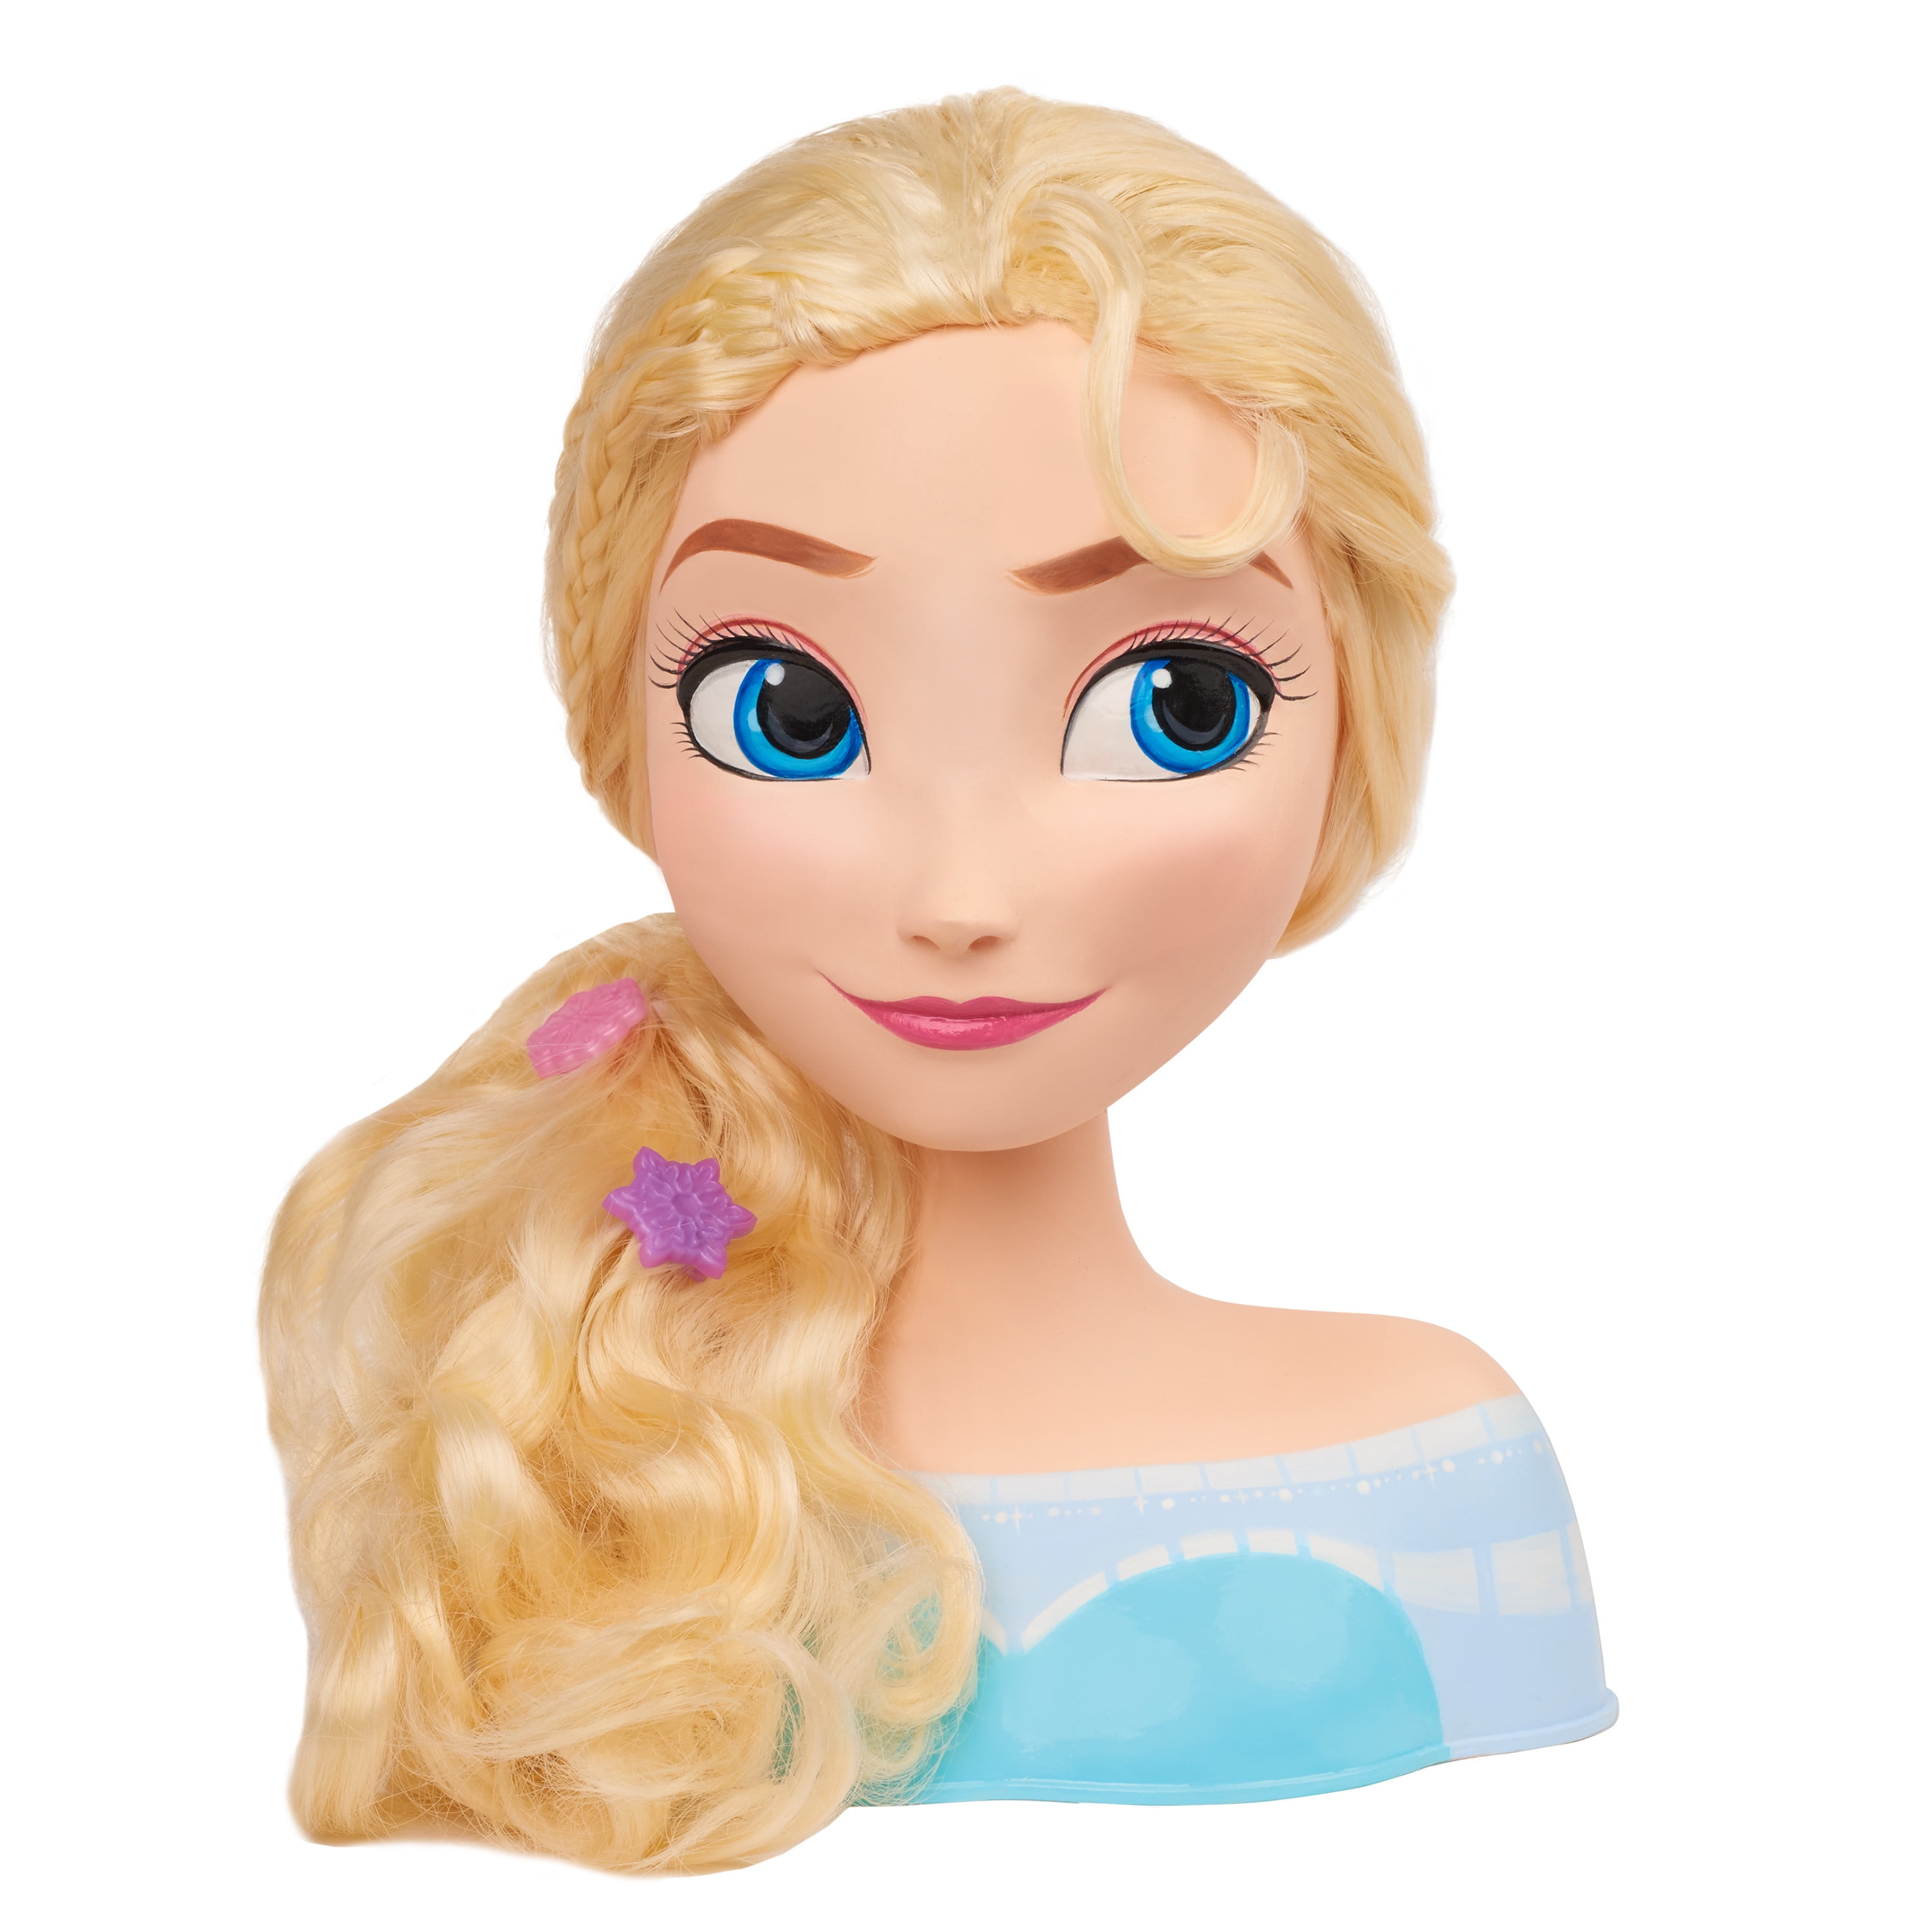 Disney Frozen Elsa Styling Head, Officially Licensed Kids Toys for Ages 3  Up, Gifts and Presents 